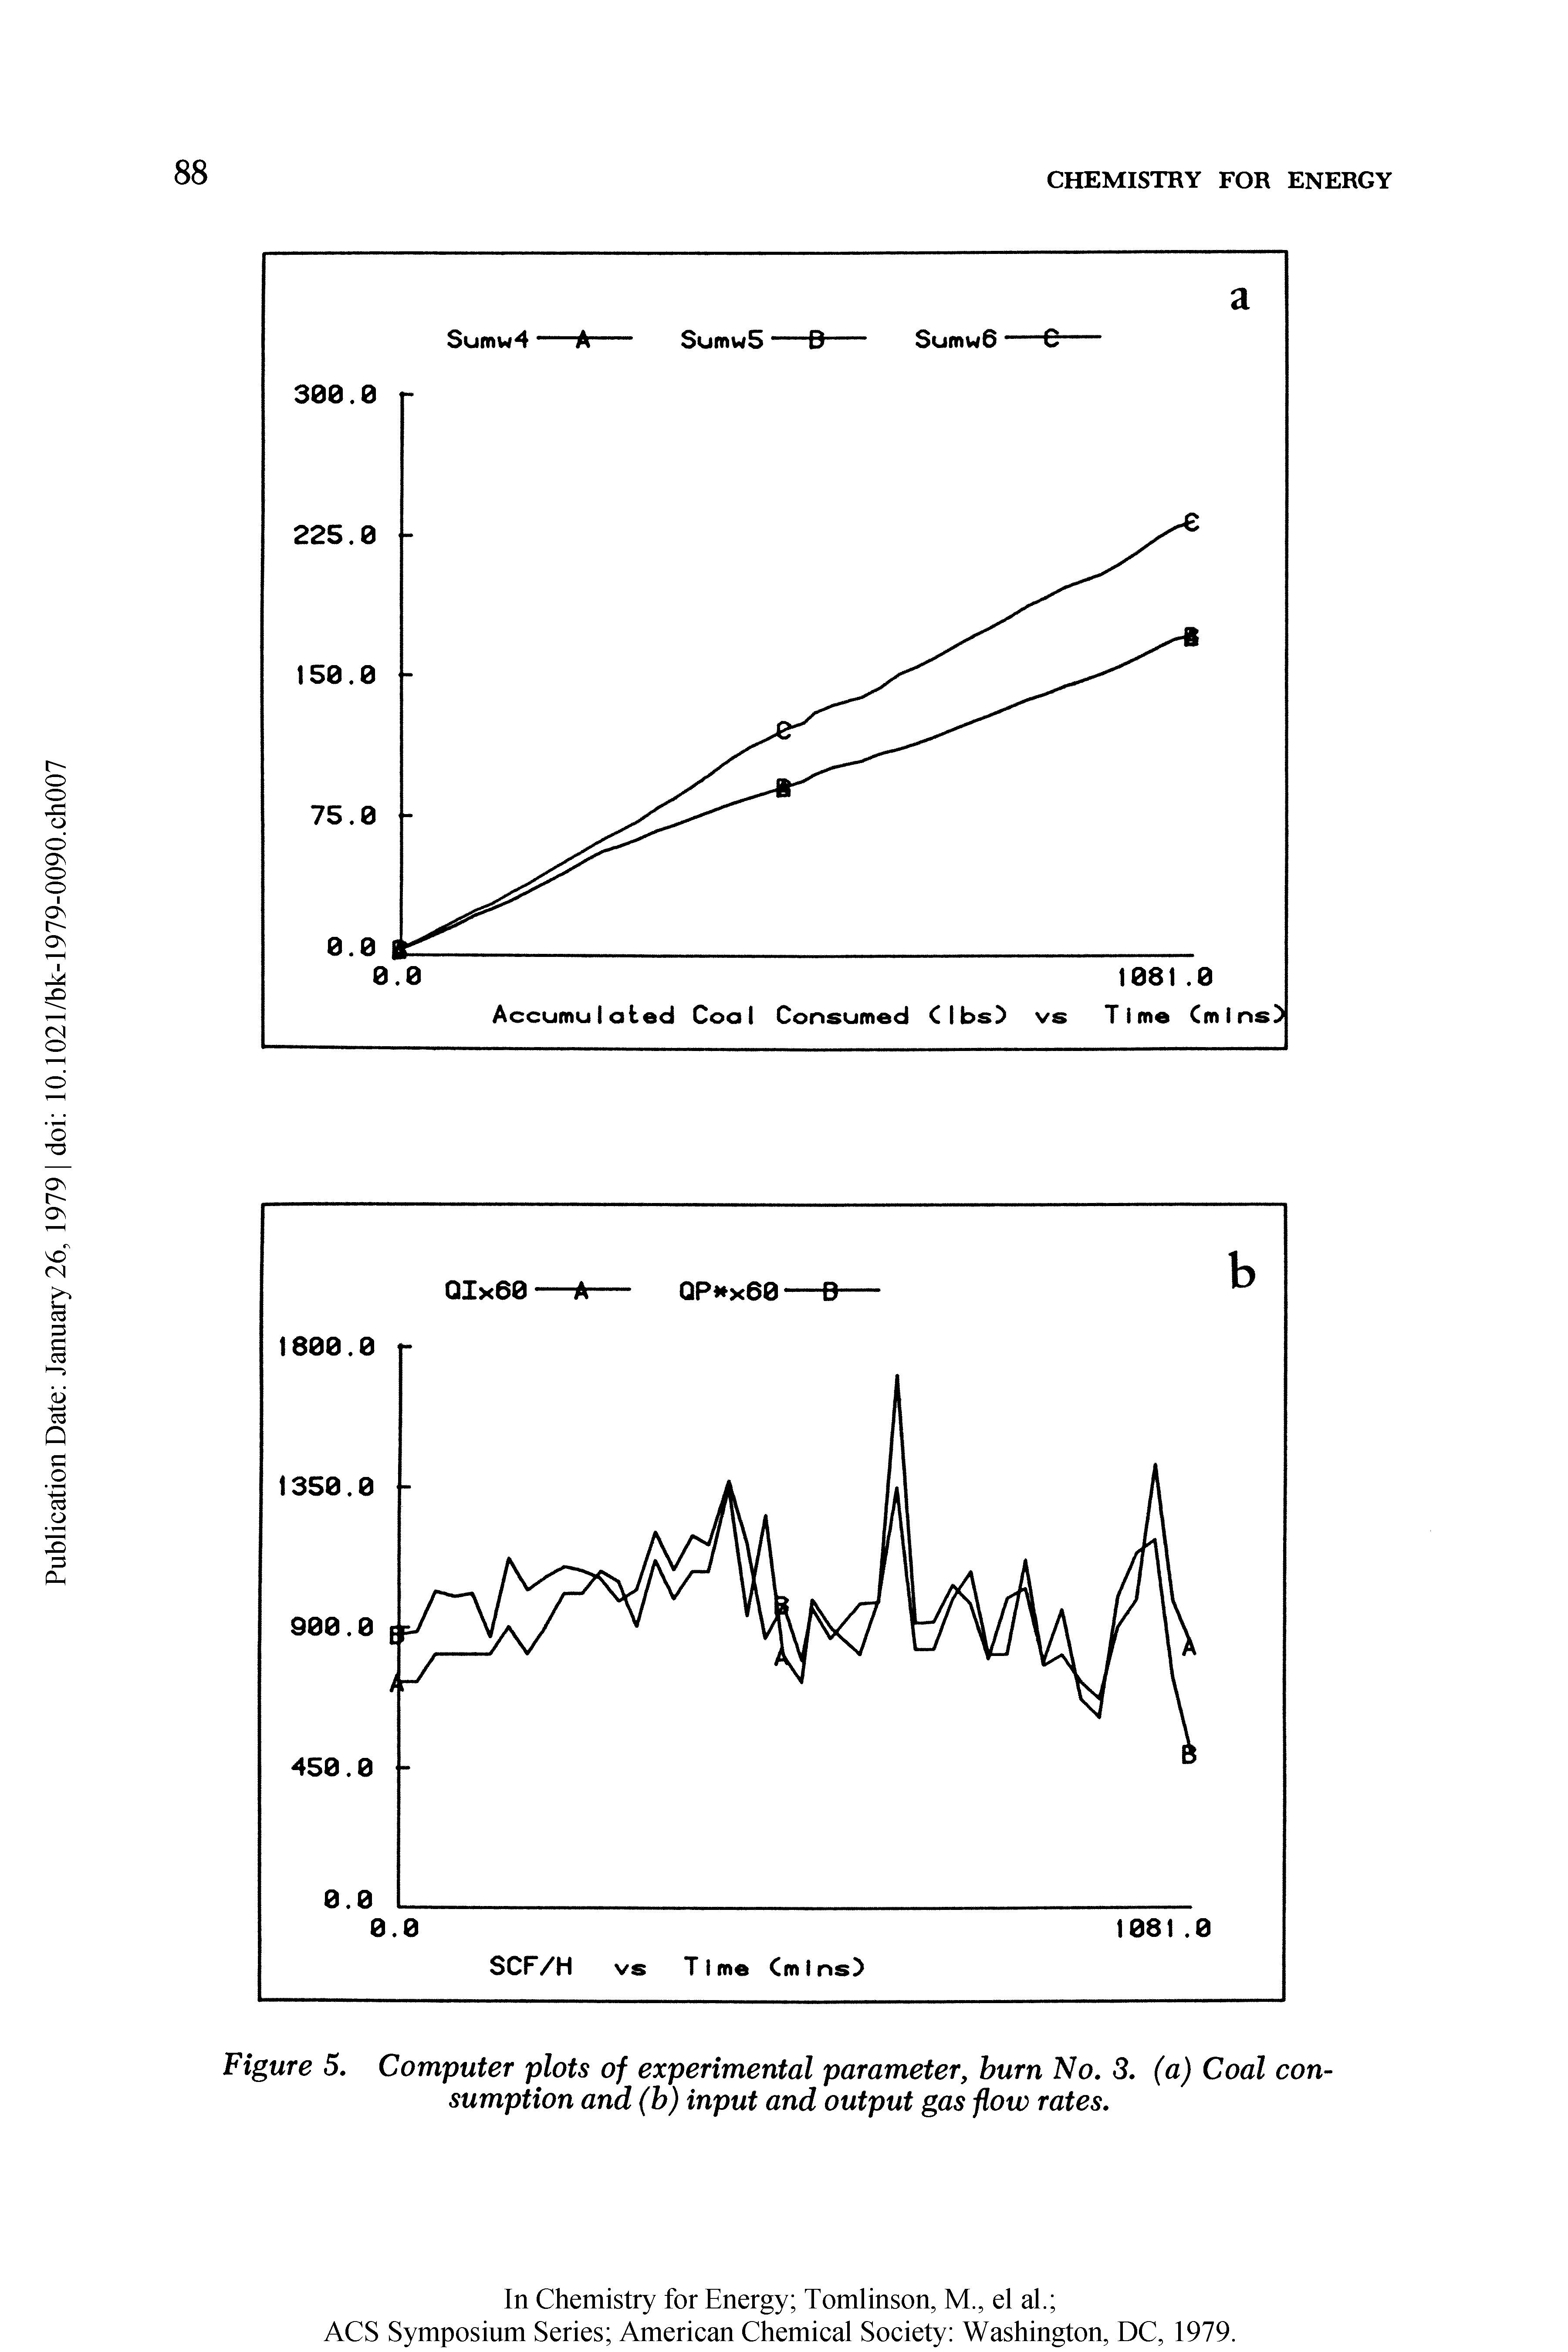 Figure 5. Computer plots of experimental parameter, burn No, S, (a) Coal consumption and (b) input and output gas flow rates.